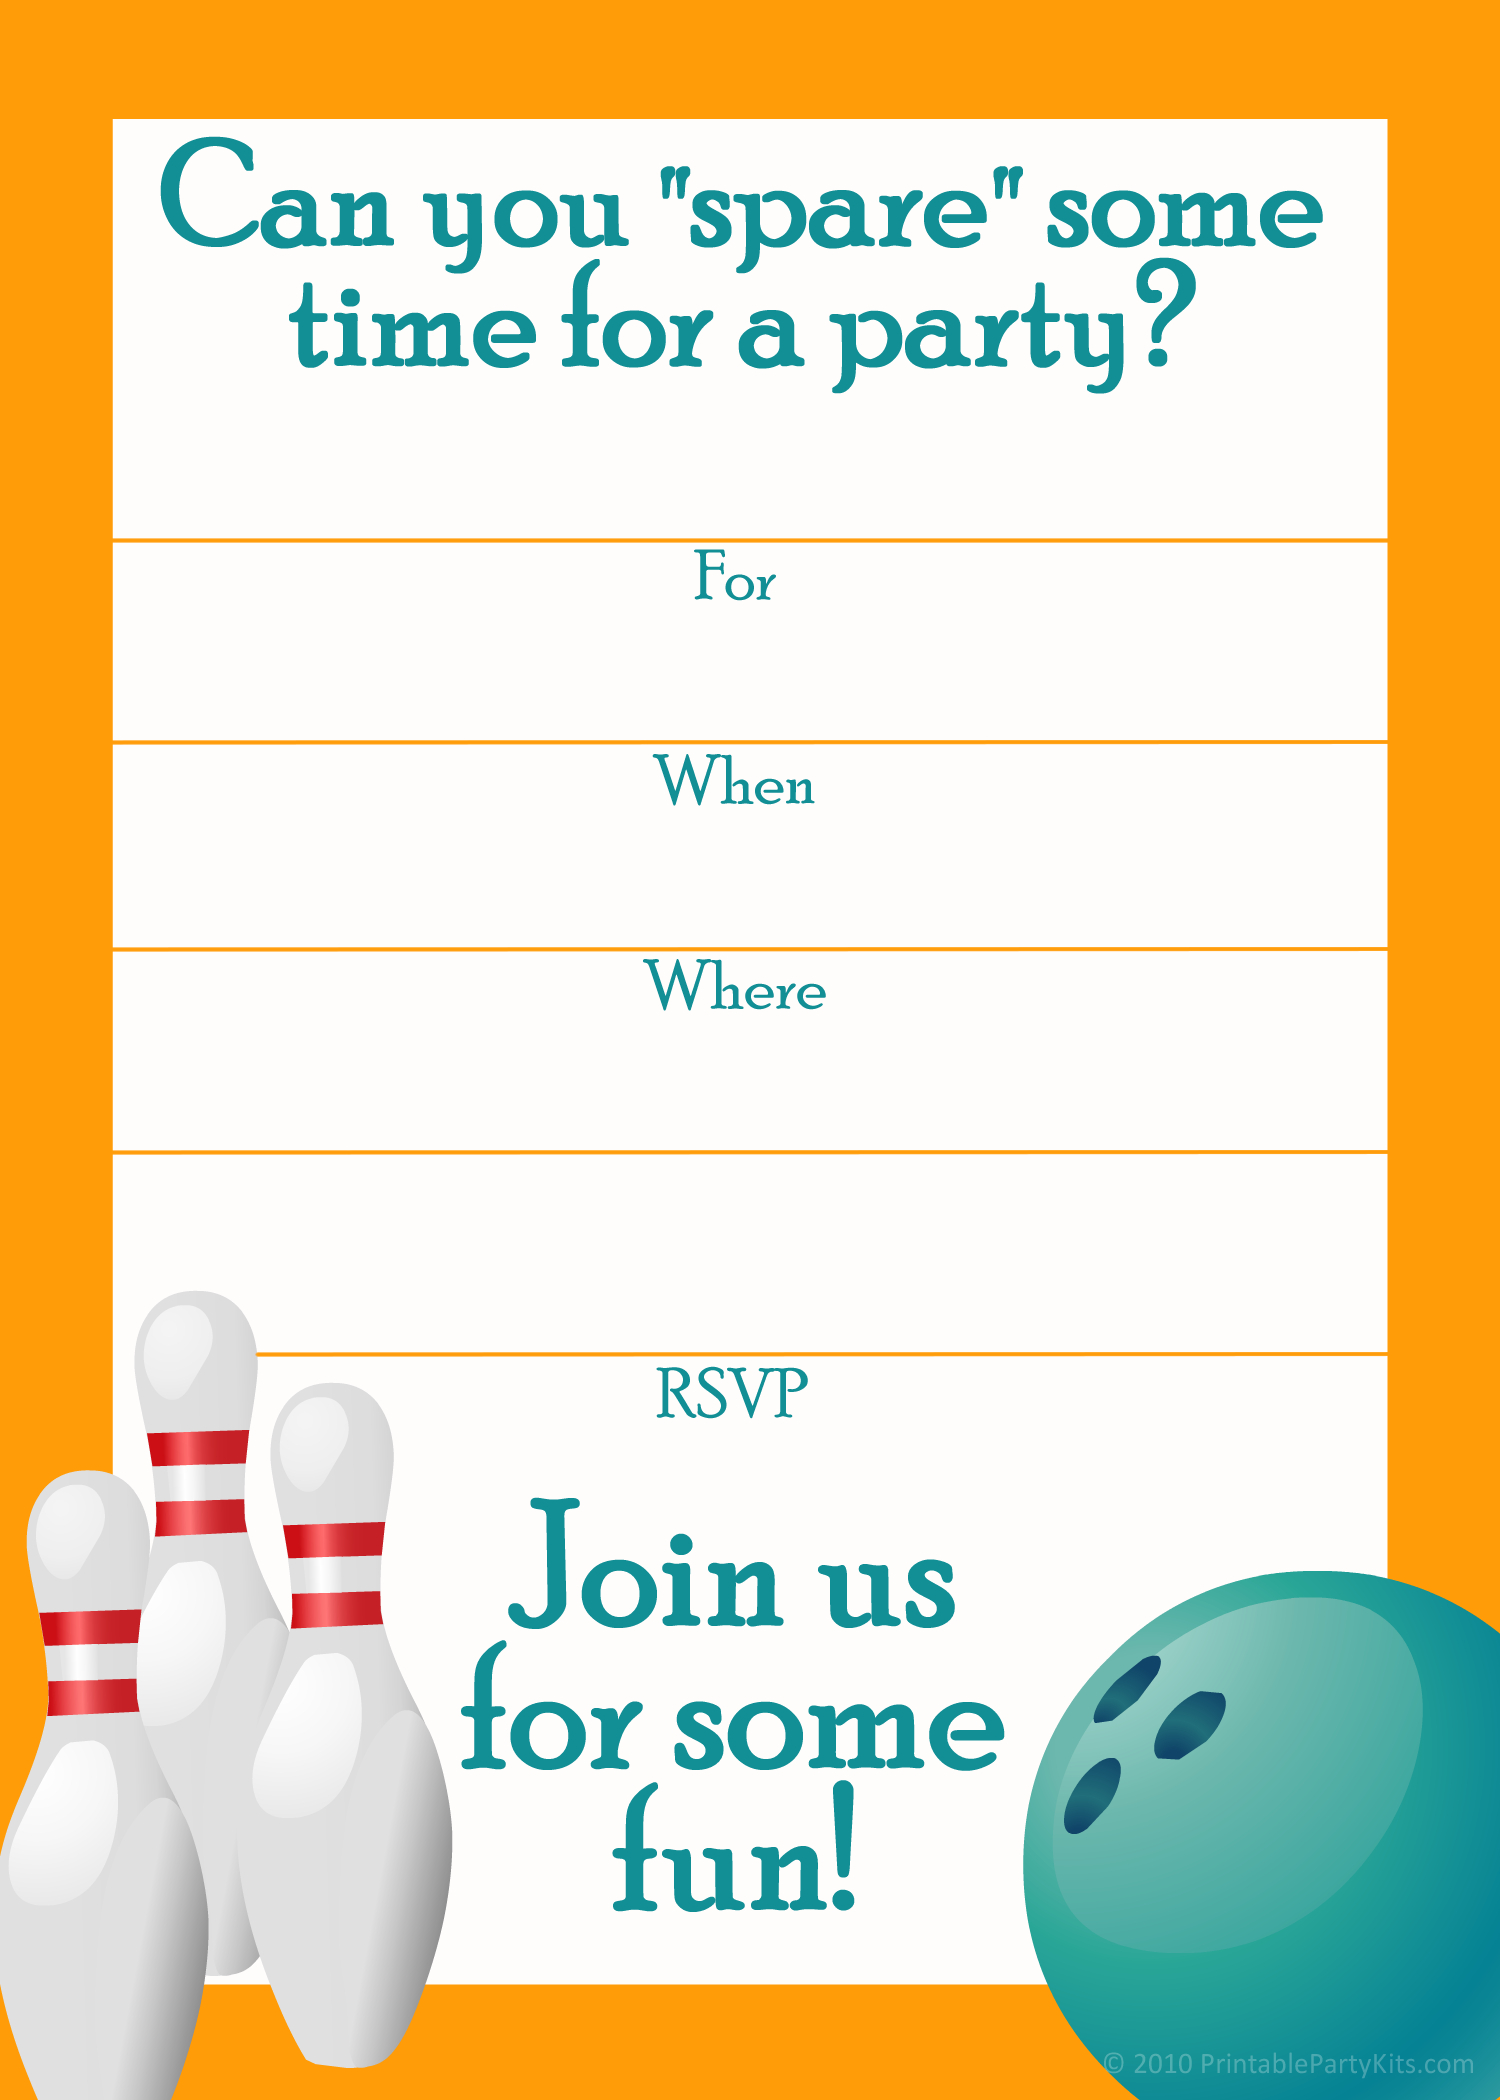 Free Printable Sports Birthday Party Invitations Templates | Party - Free Printable Bowling Birthday Party Invitations